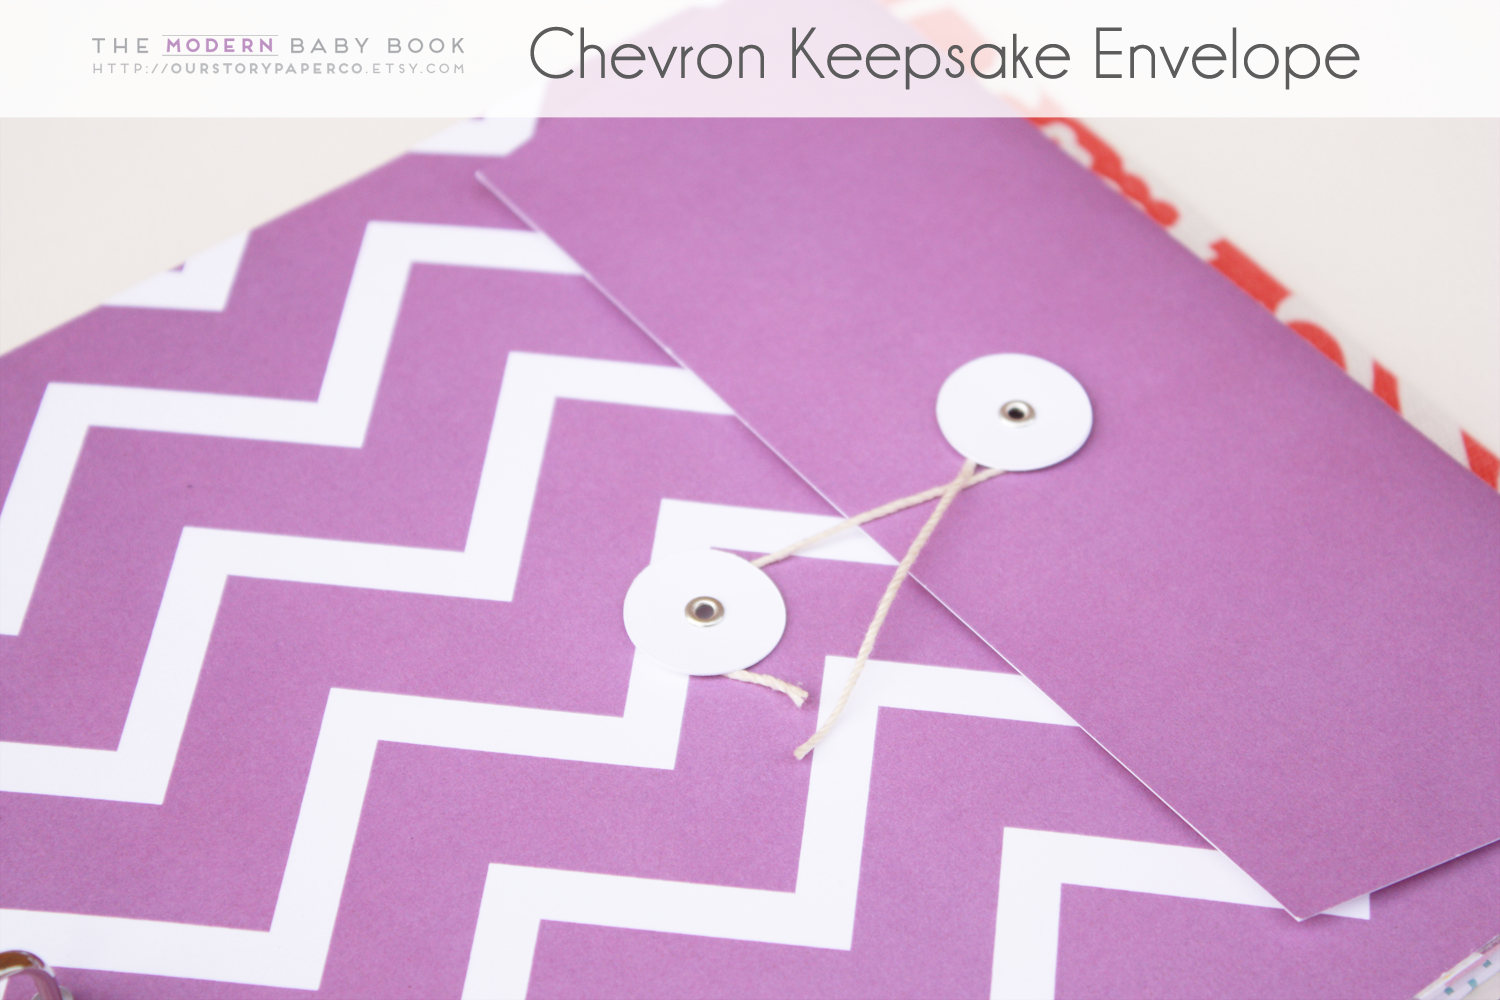 Colored Chevron on White Background Keepsake Envelopes - Our Story Paper Co.